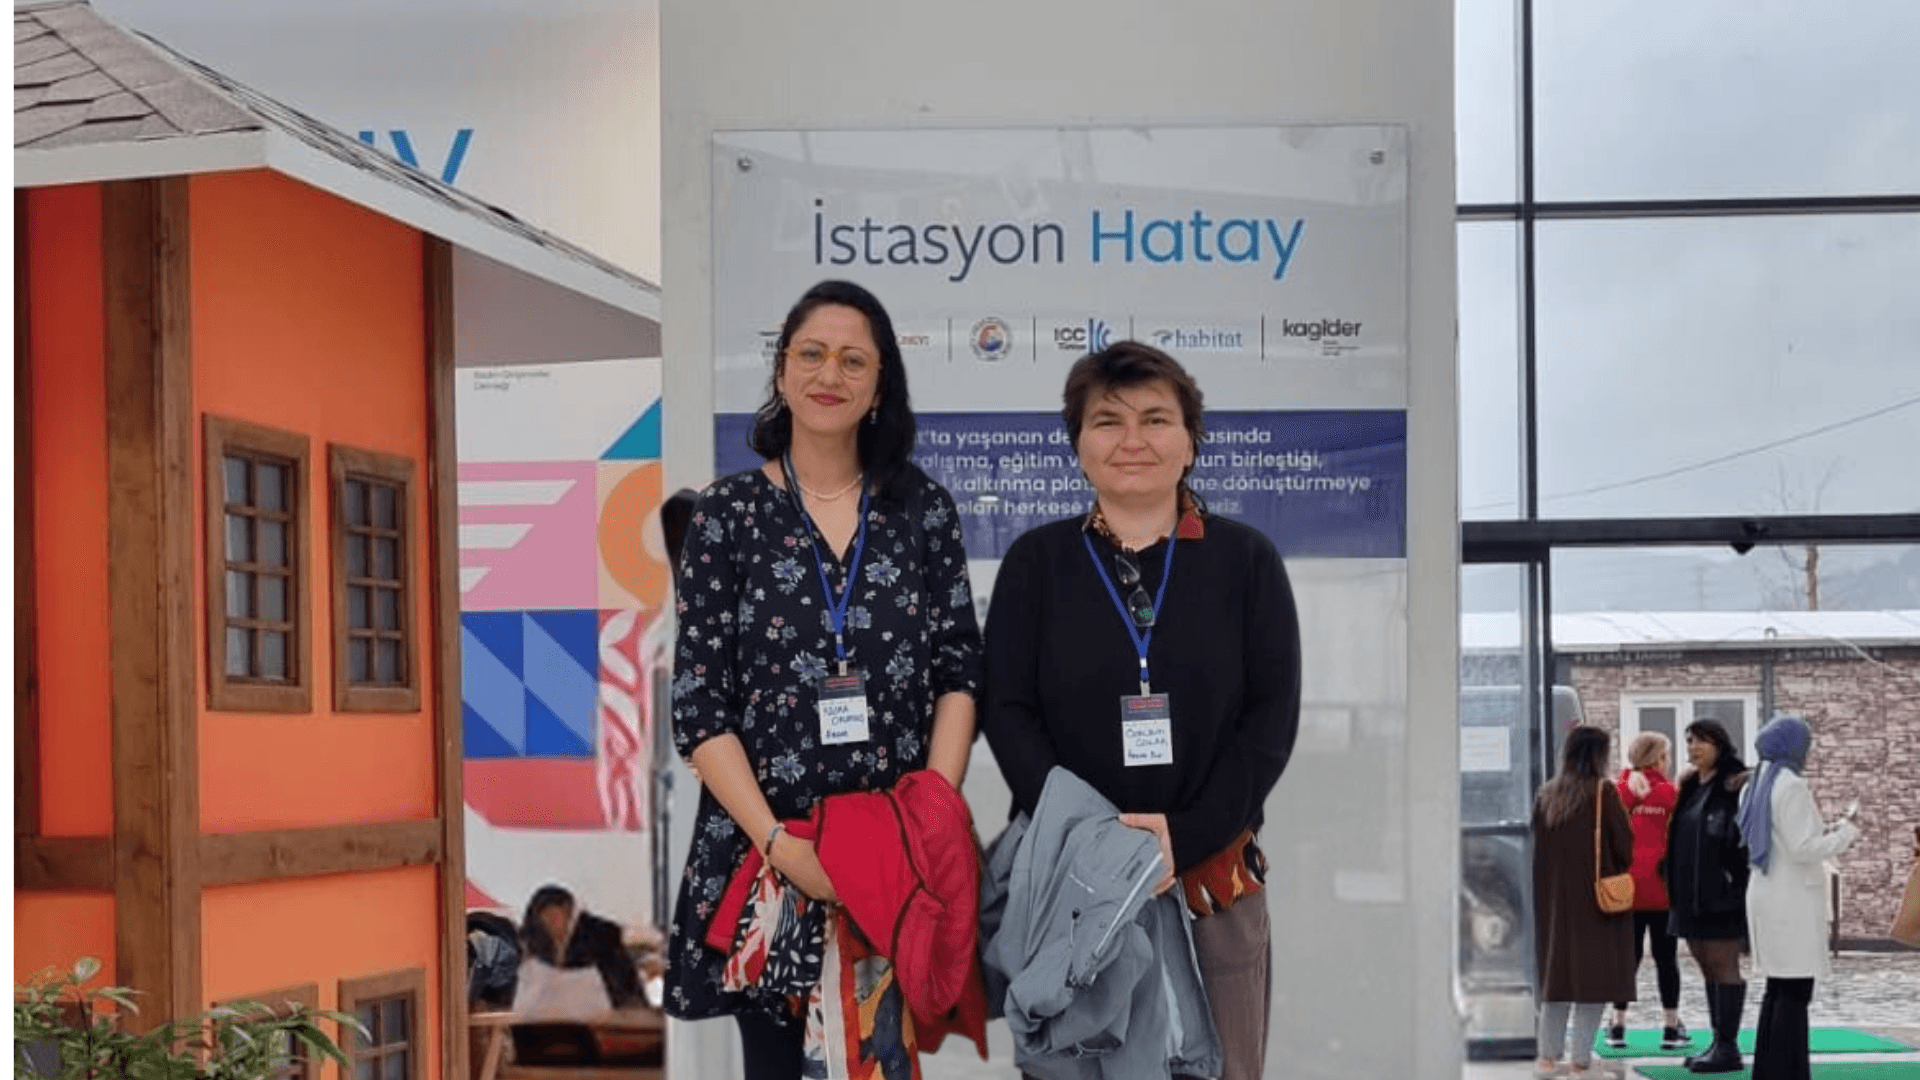 Two people standing in front of "istasyon Hatay" sign